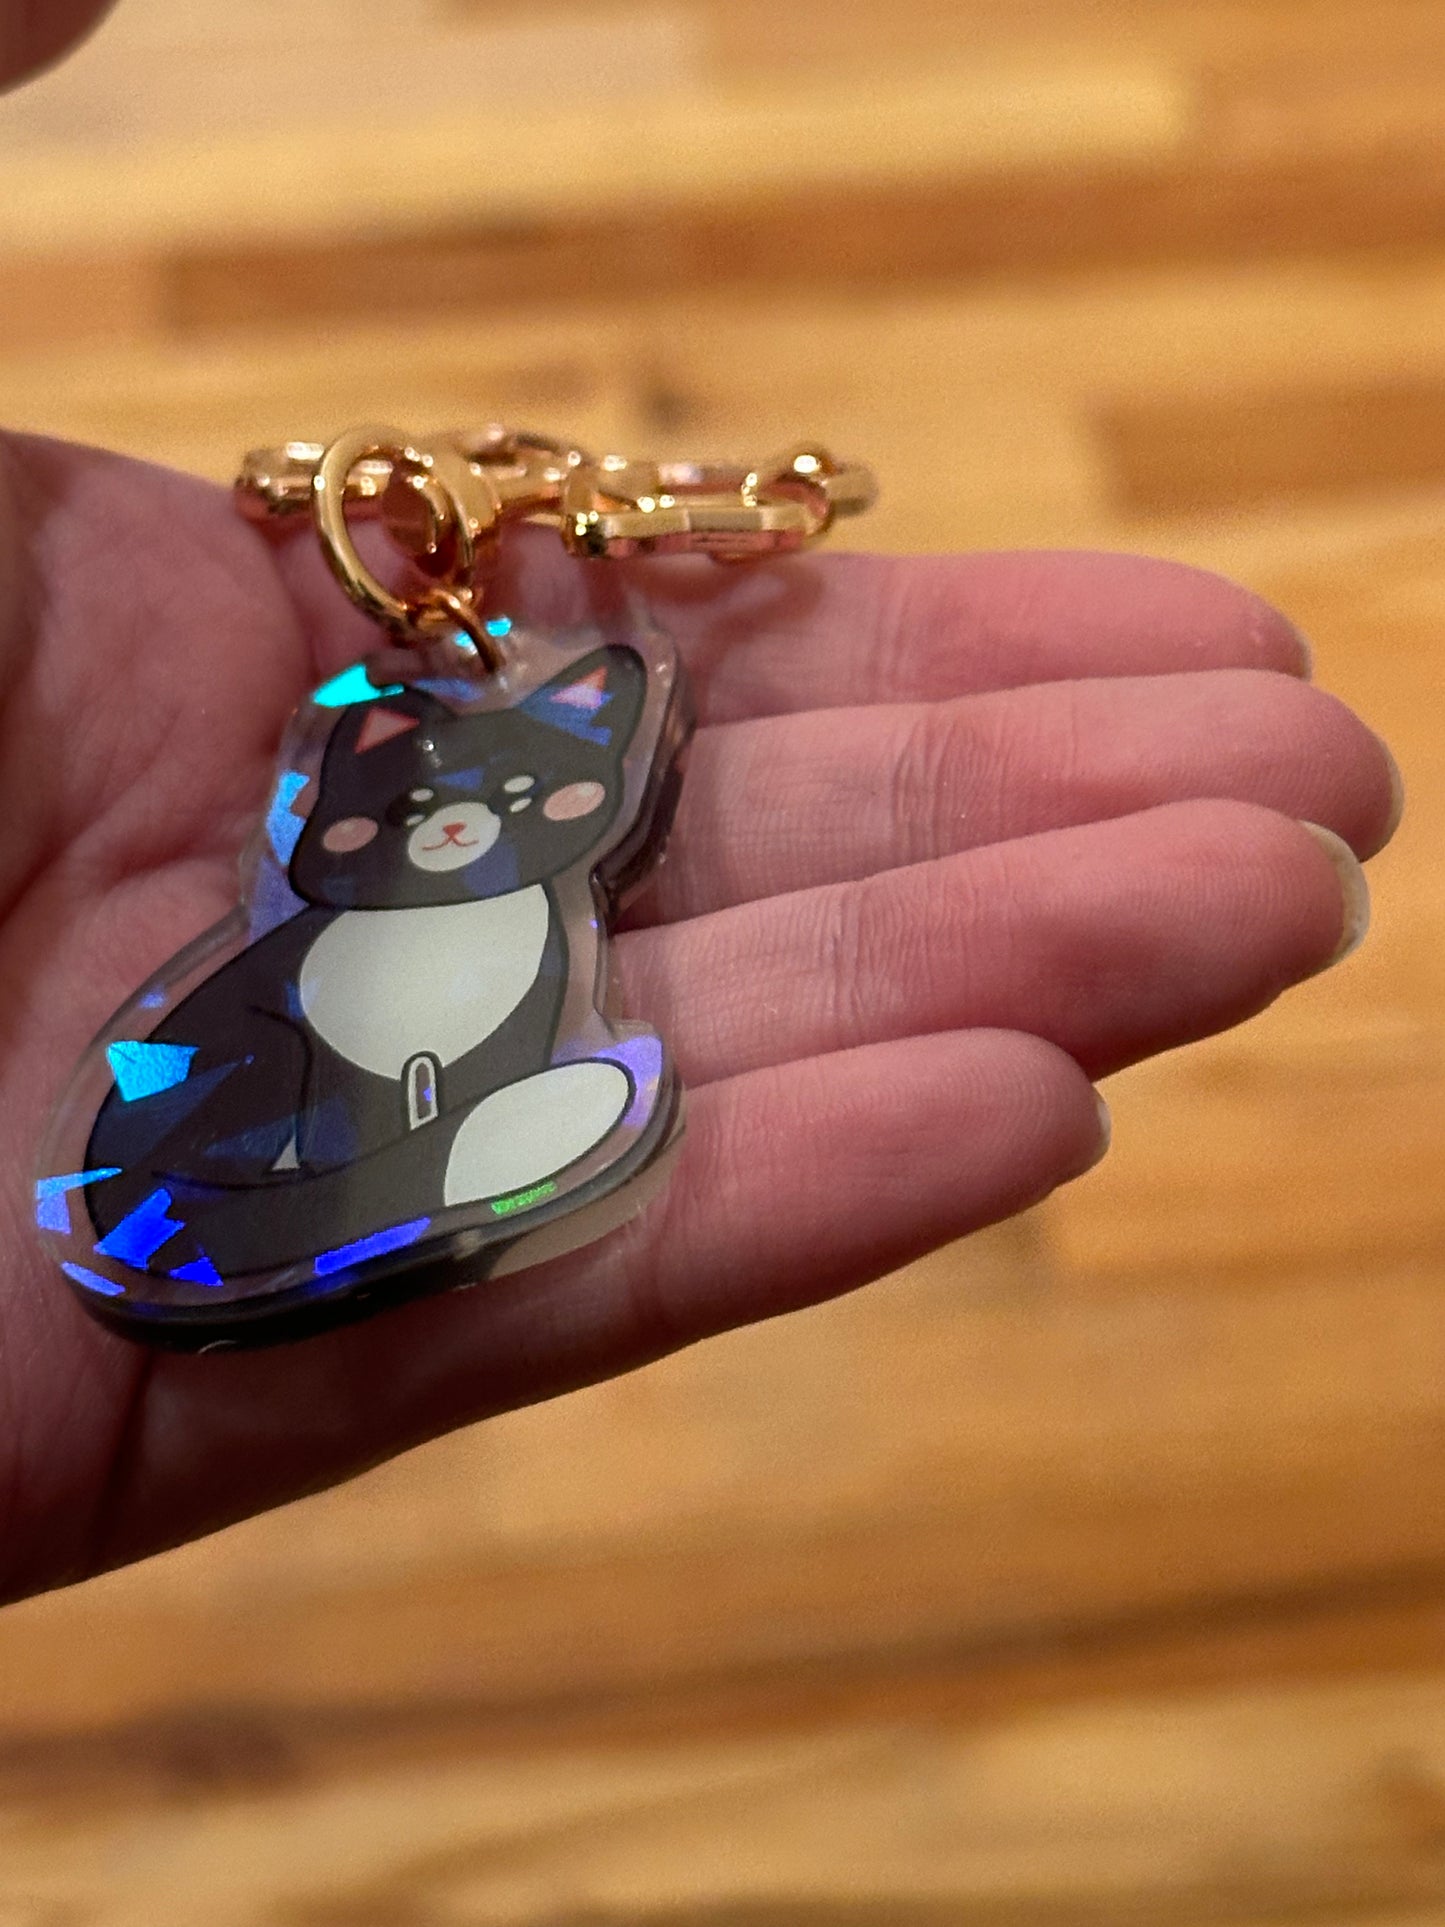 Cute Black and White Kitty Holographic Acrylic Keychain